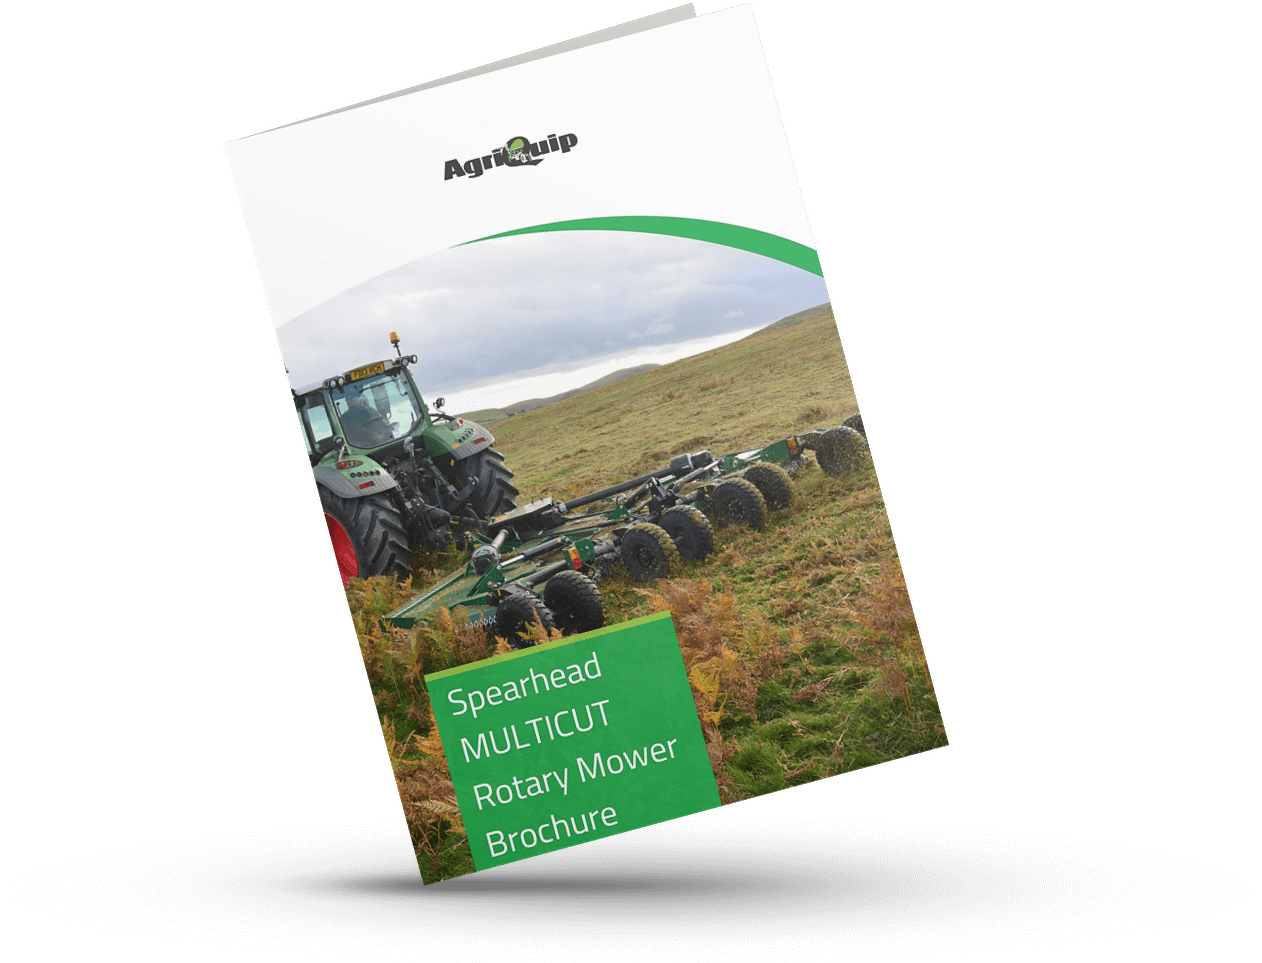 Download our Spearhead Multicut Rotary Mowers brochure